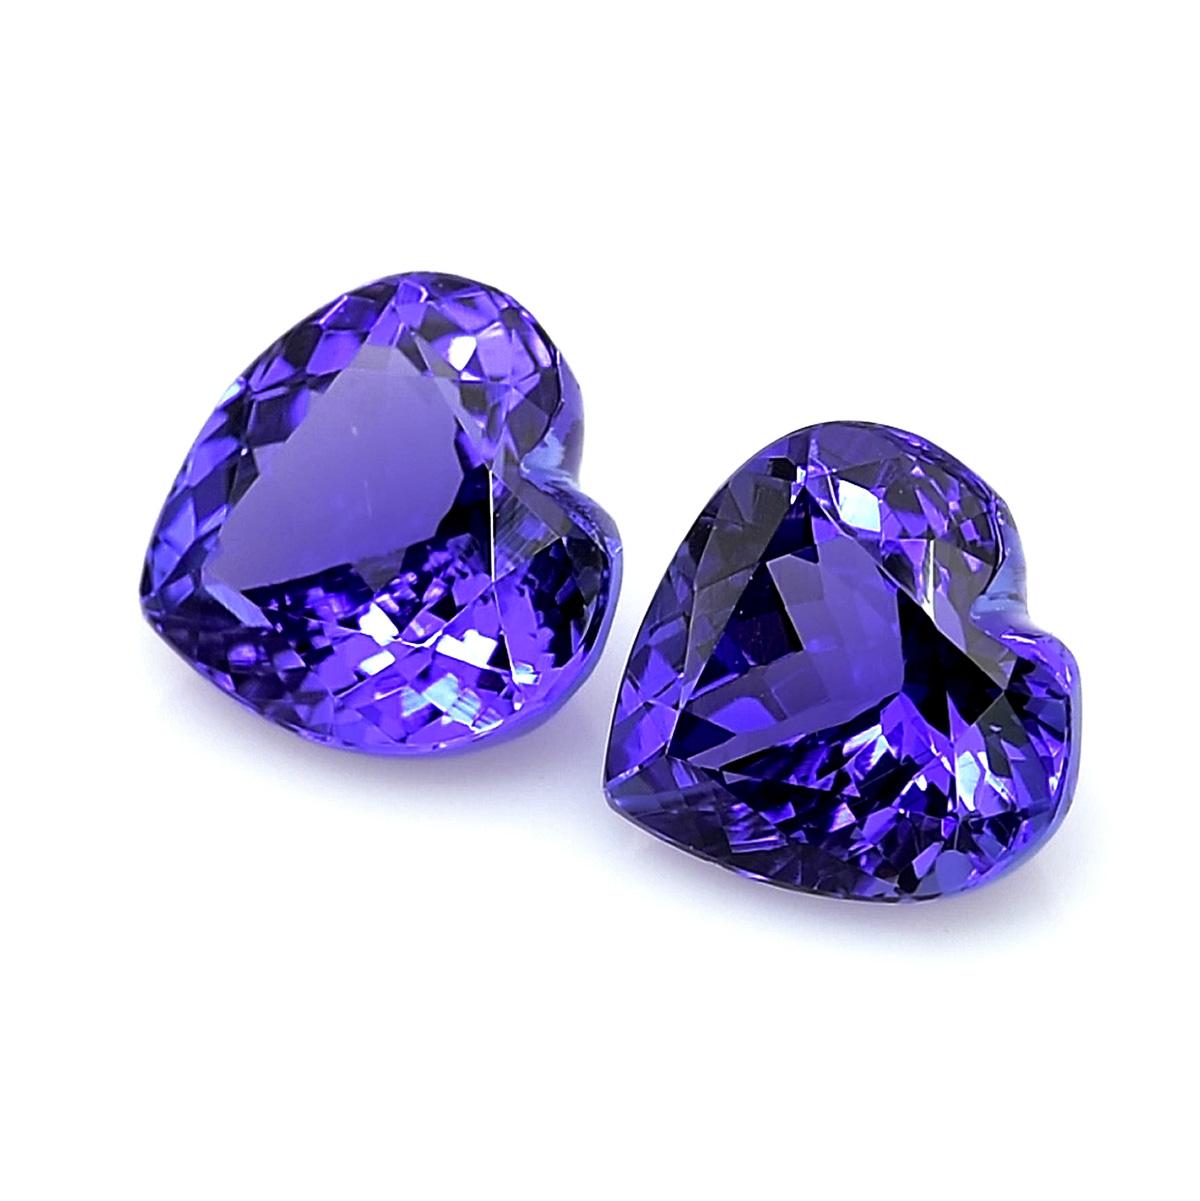 A deep purplish blue beams from this pair of natural Tanzanites. The perfect pair of hearts, their well-matched shape and color will add the right pop to that custom pair of earrings.

Identification: Natural Tanzanites Pair

• Carat: 5.99 carats